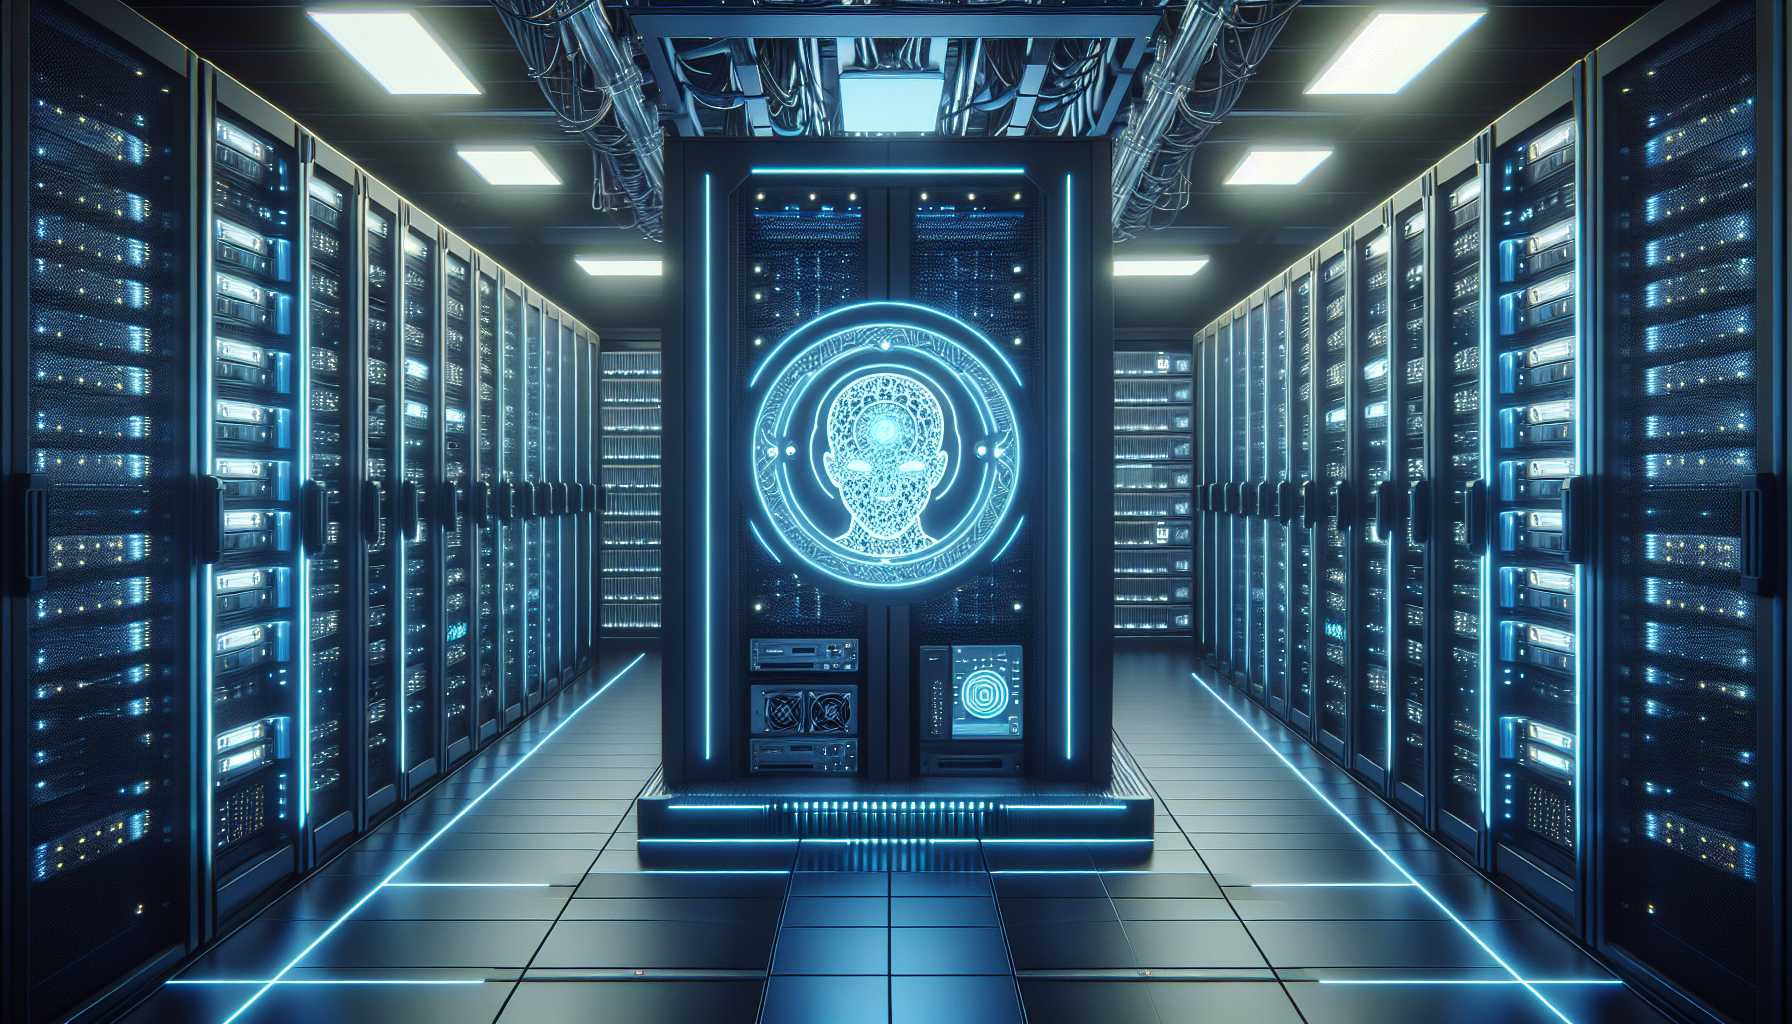 Futuristic server room with Zoom logo indicating AI advancements